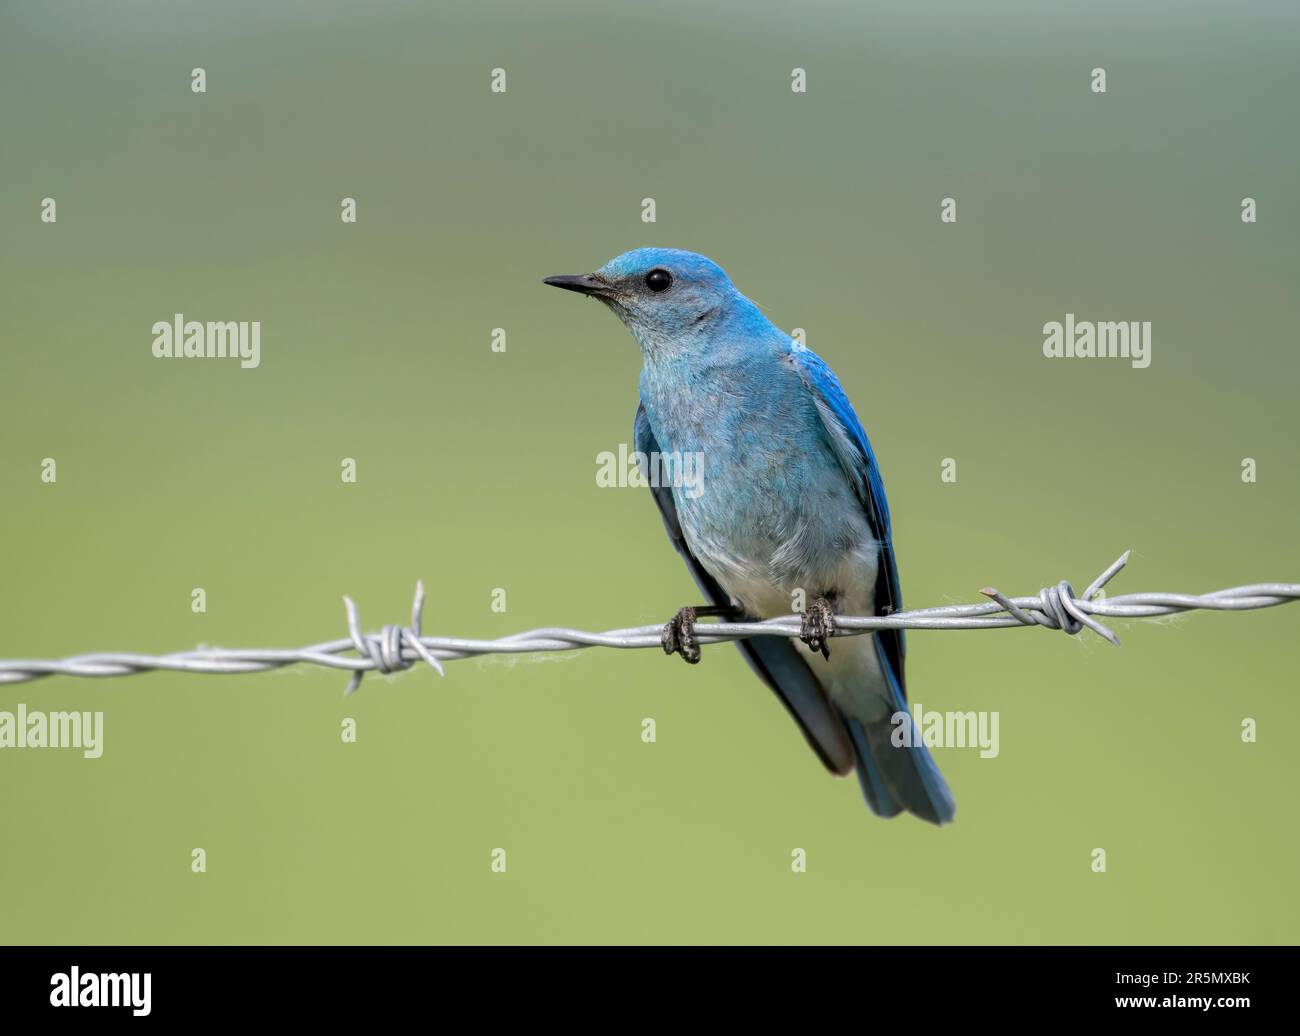 Male Mountain bluebird (Sialia currucoides) perched on a barbed wire fence, South of Highway 22x, Calgary,  Alberta, Canada, Stock Photo